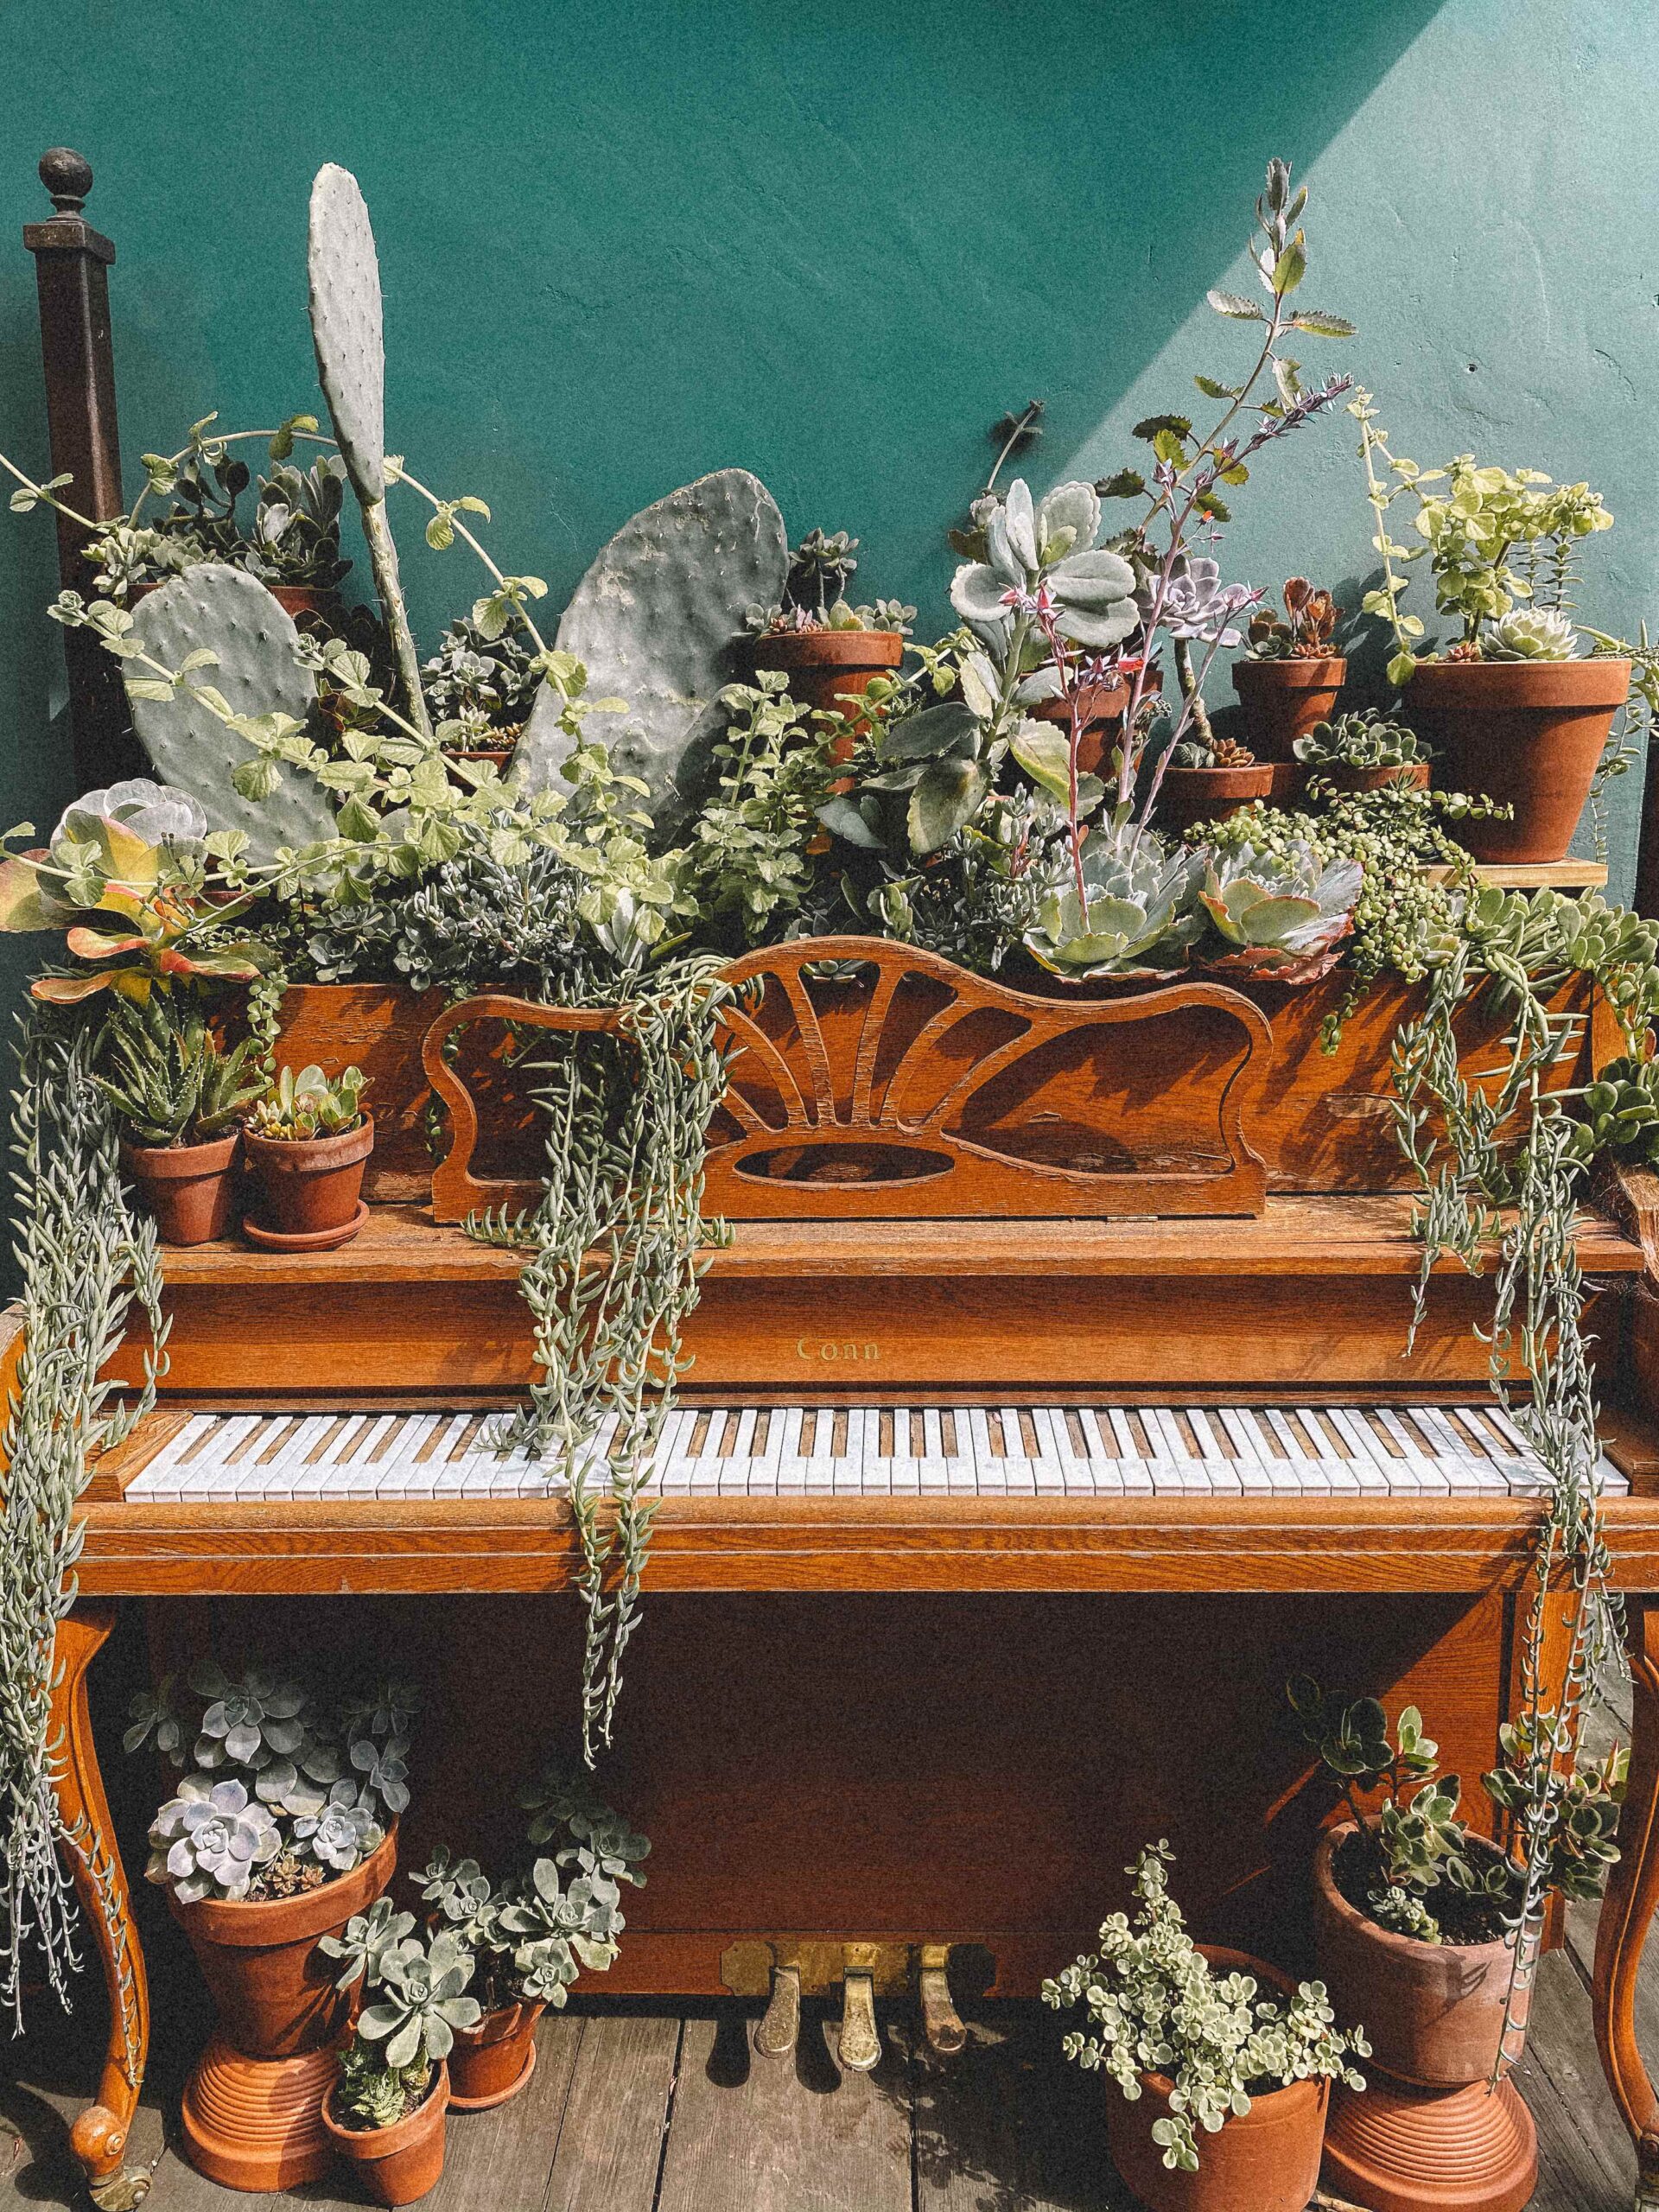 Things to do in Old Town San Diego Garden Coffee, piano covered in potted plant and succulents